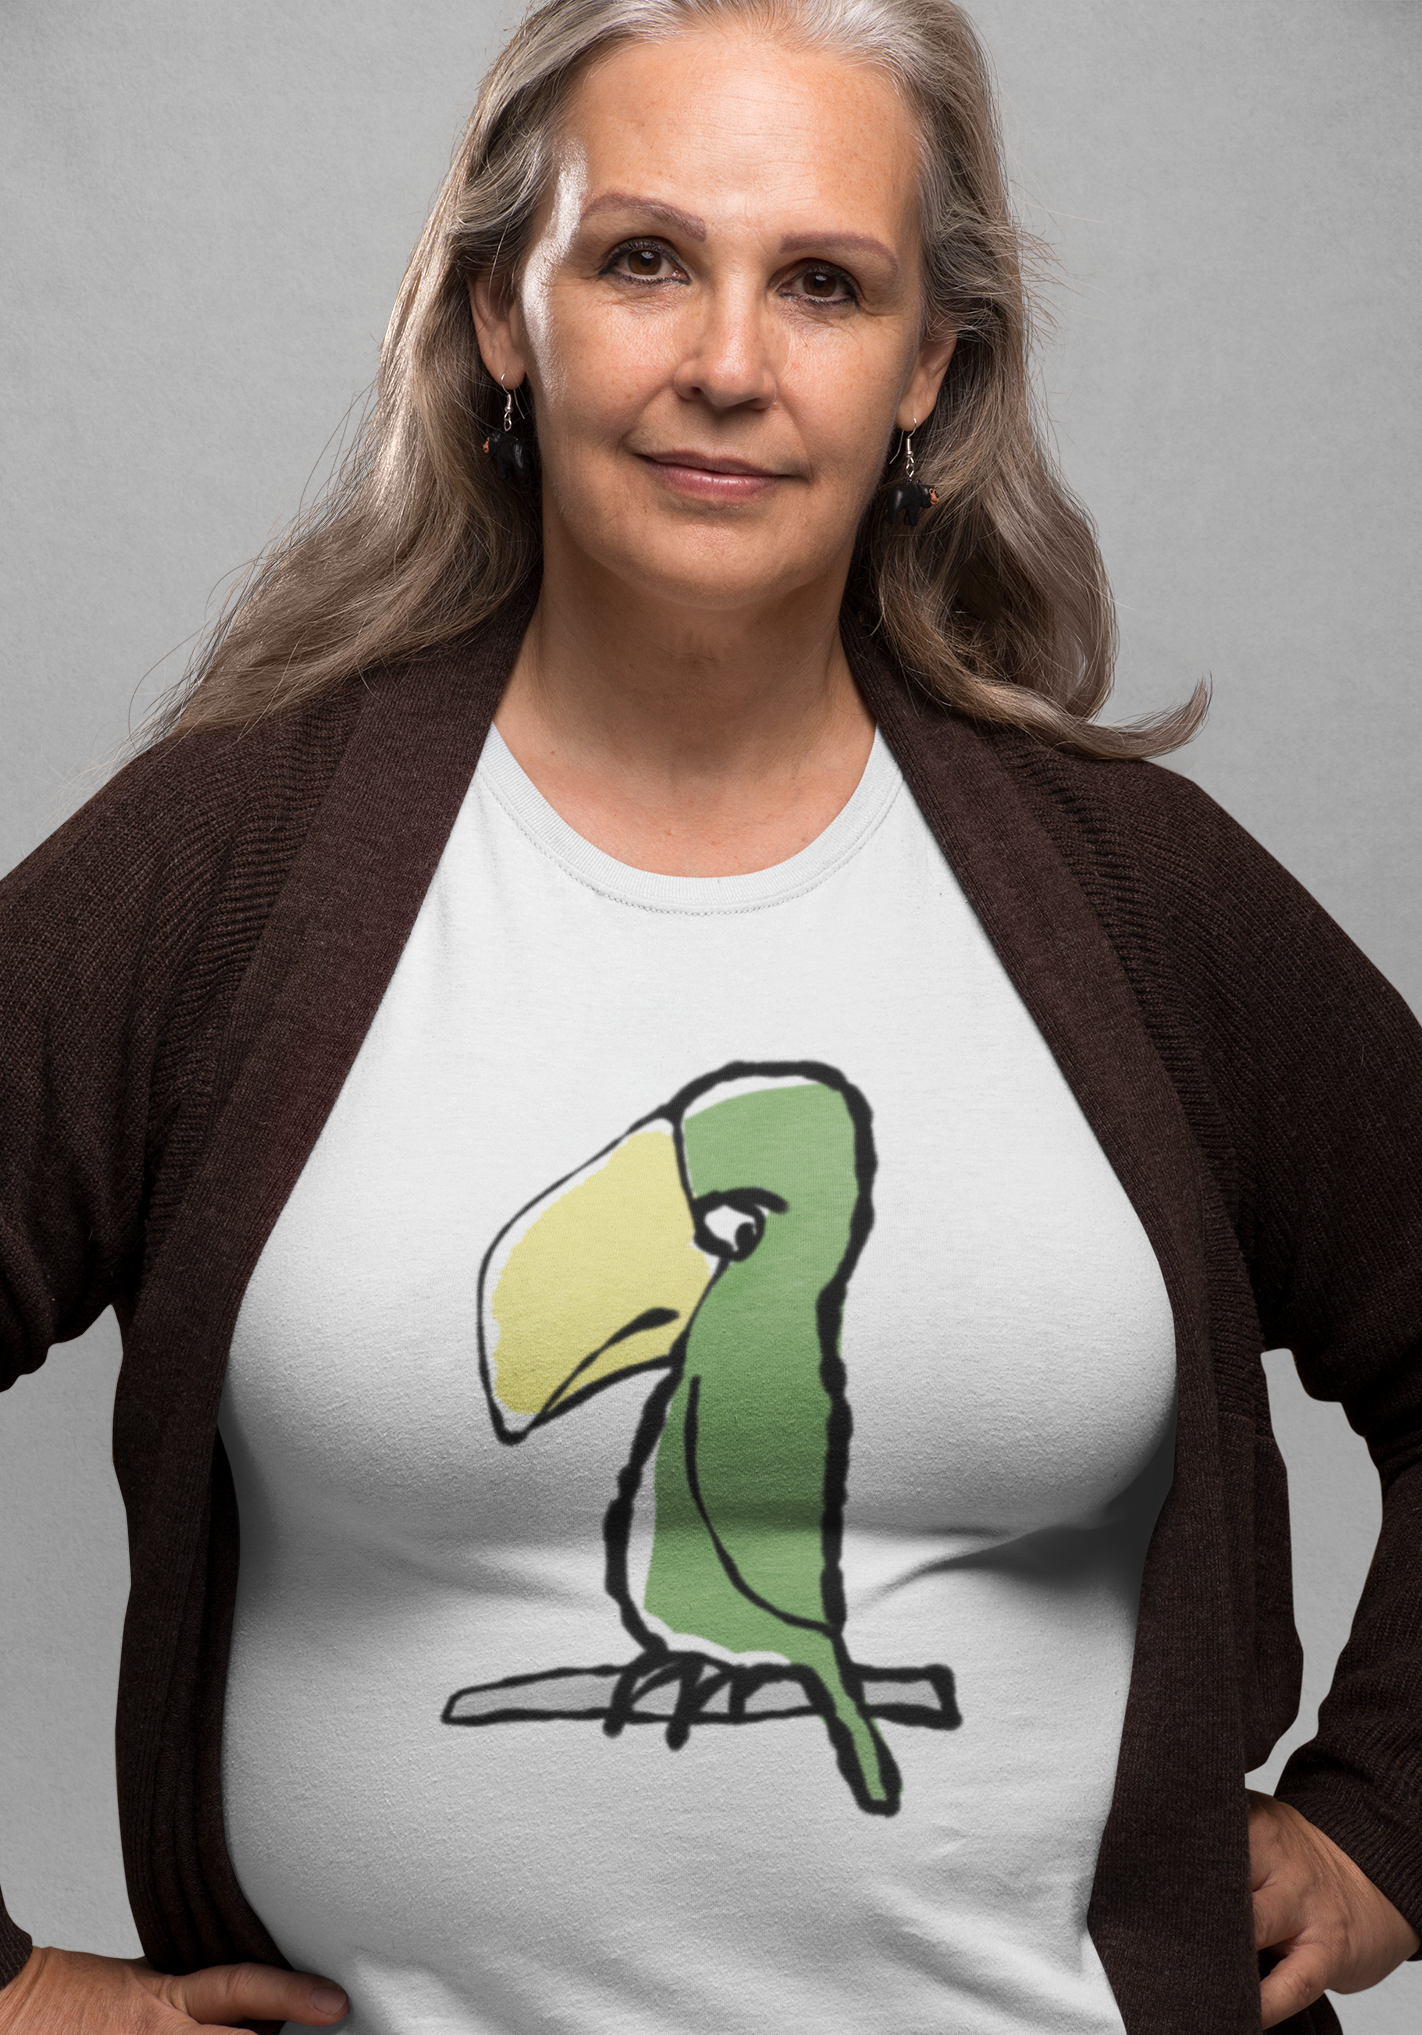 Woman wearing White Unisex Hector and Bone T-shirt printed with a cute illustration of Peter Parrot